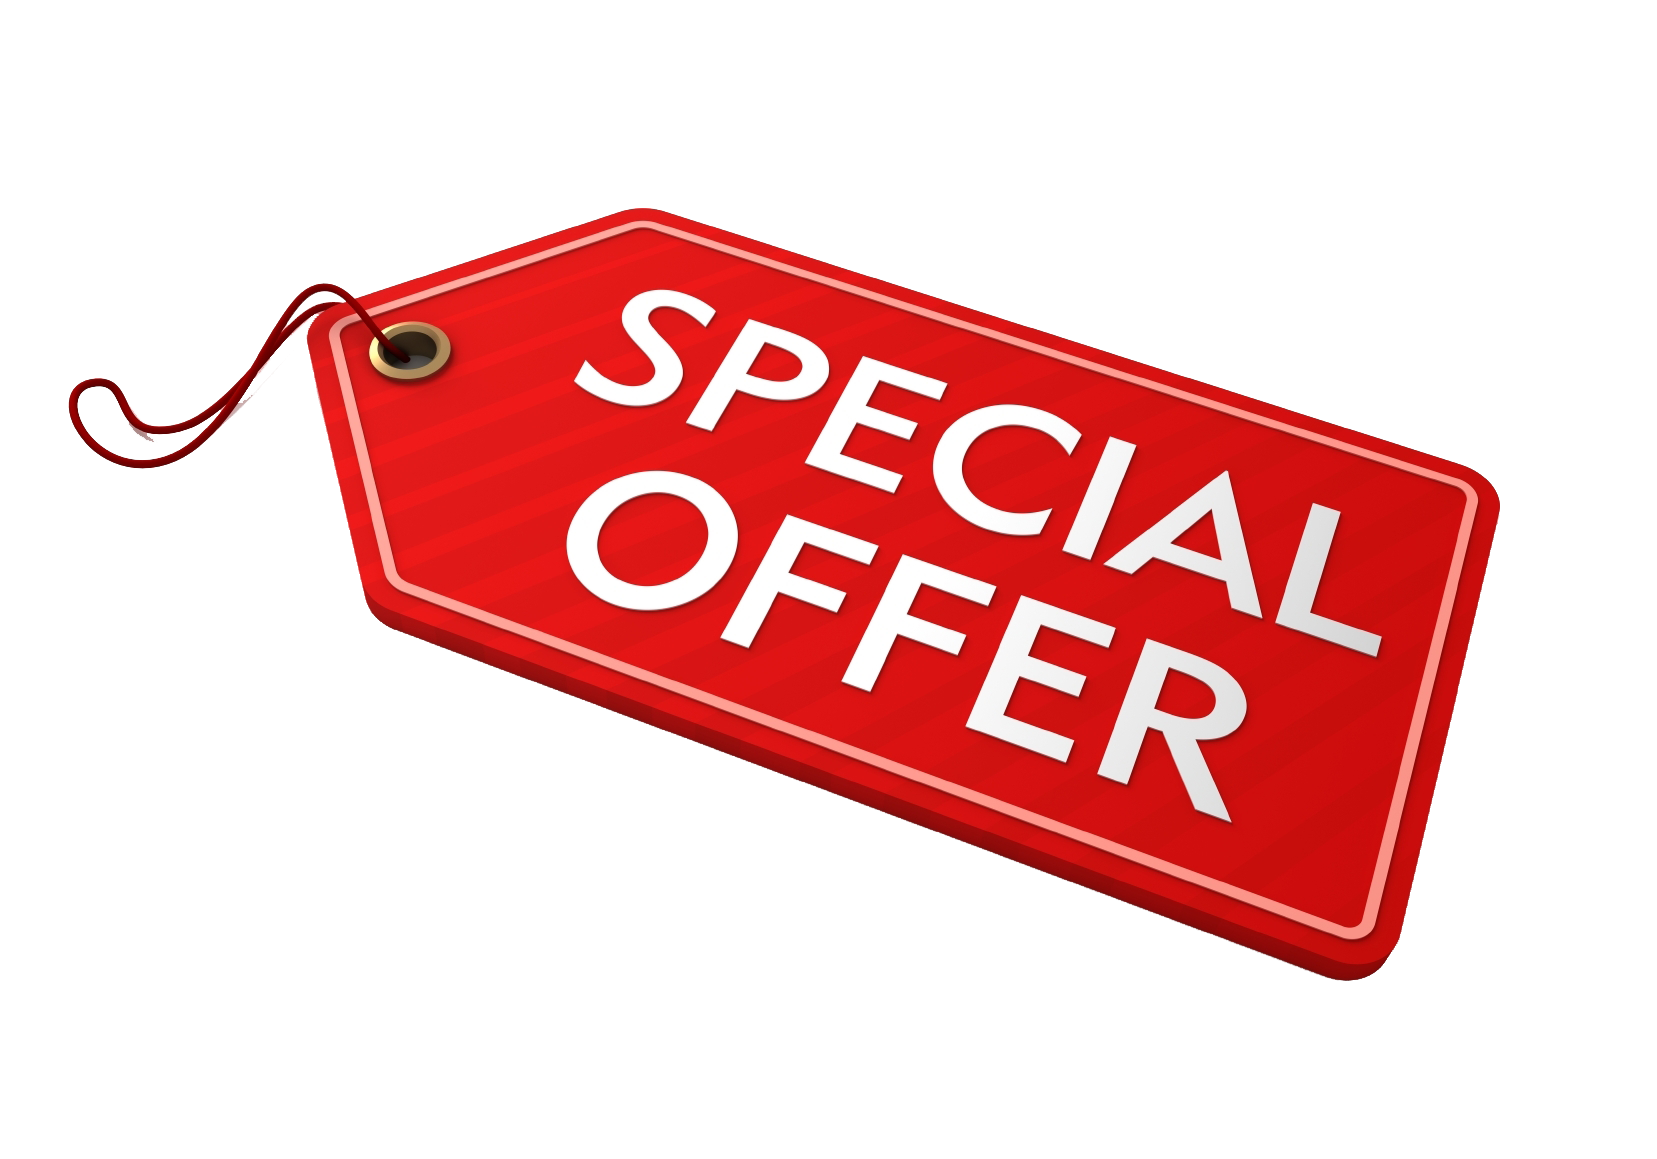 Special-offer-Download-PNG